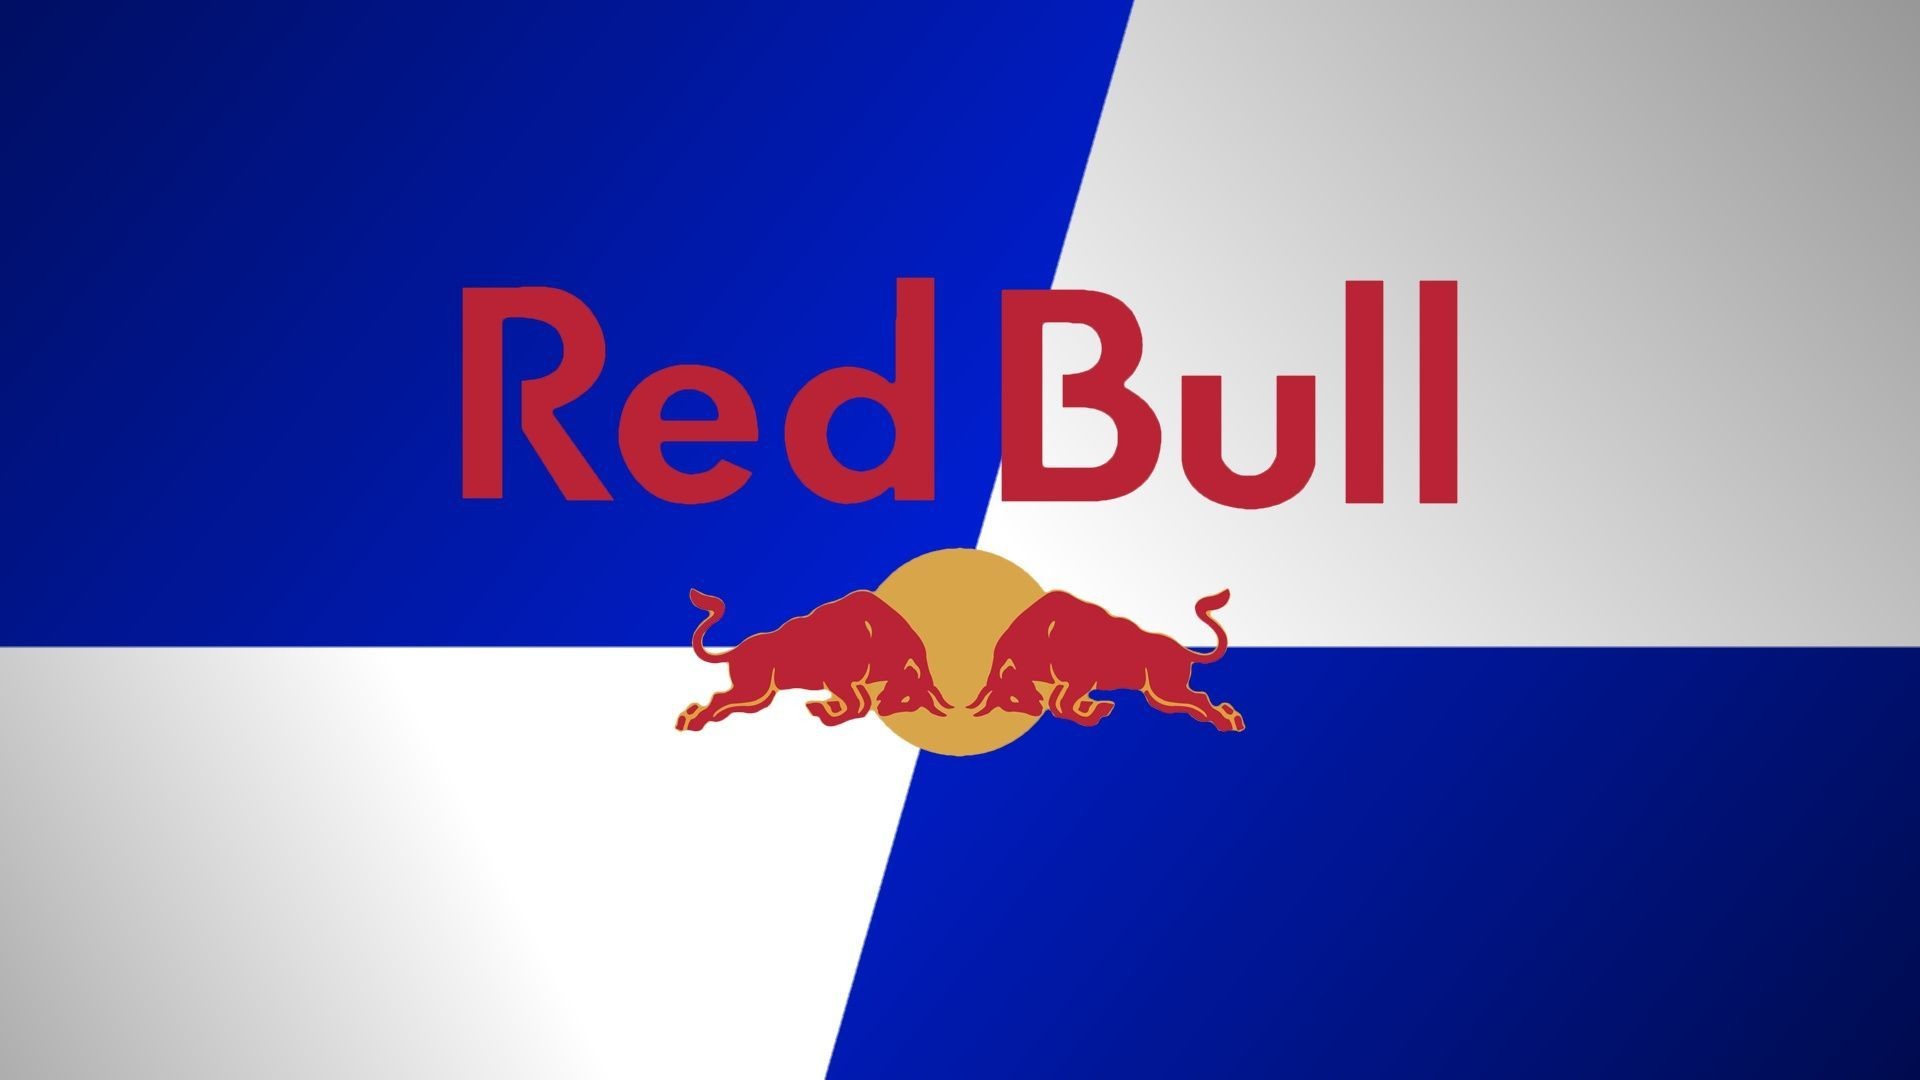 1920x1080 Red Bull Logo Wallpapers - Wallpaper Cave